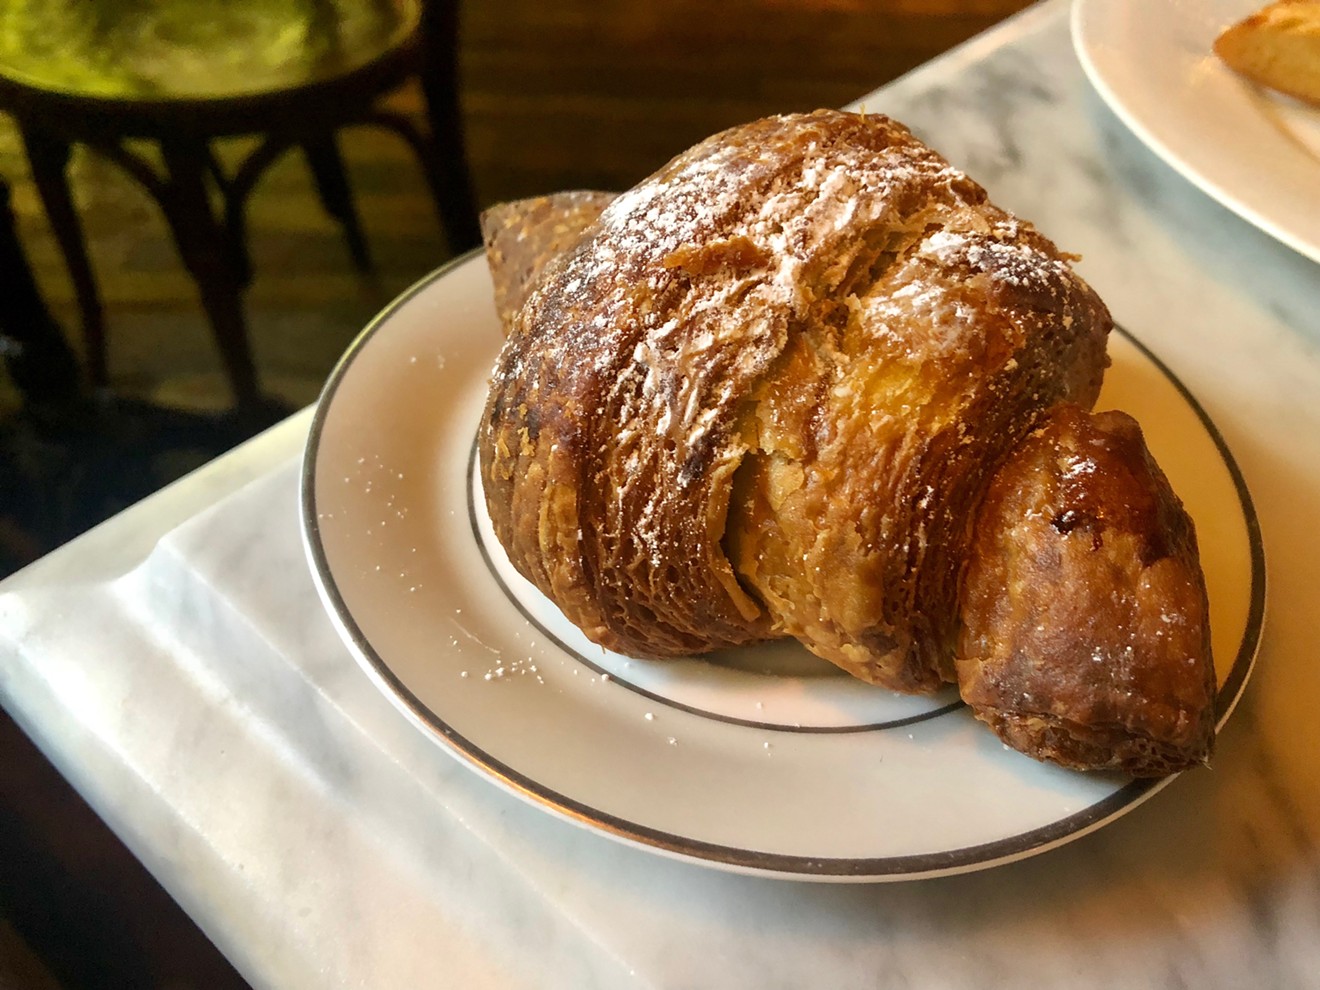 As at any French bistro, pastries are a must at Mercat.